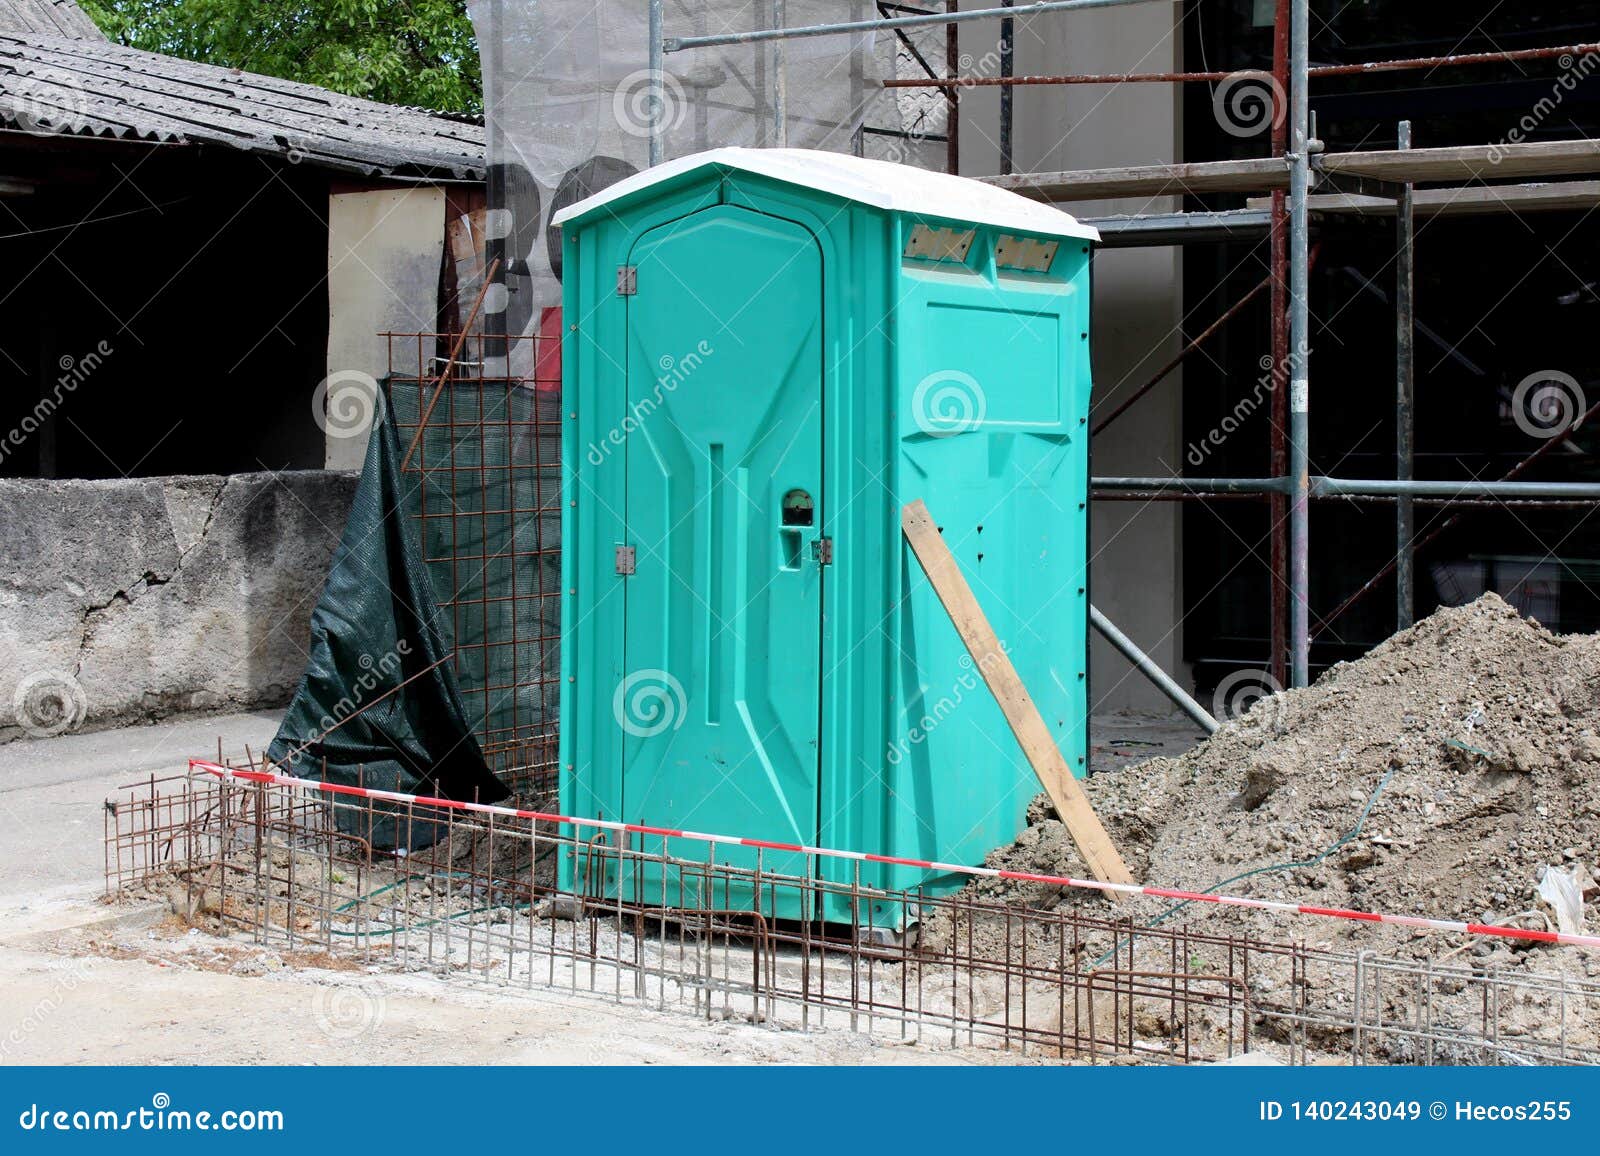 light green portable ecological toilet left on construction site surrounded with sand and other construction material with old